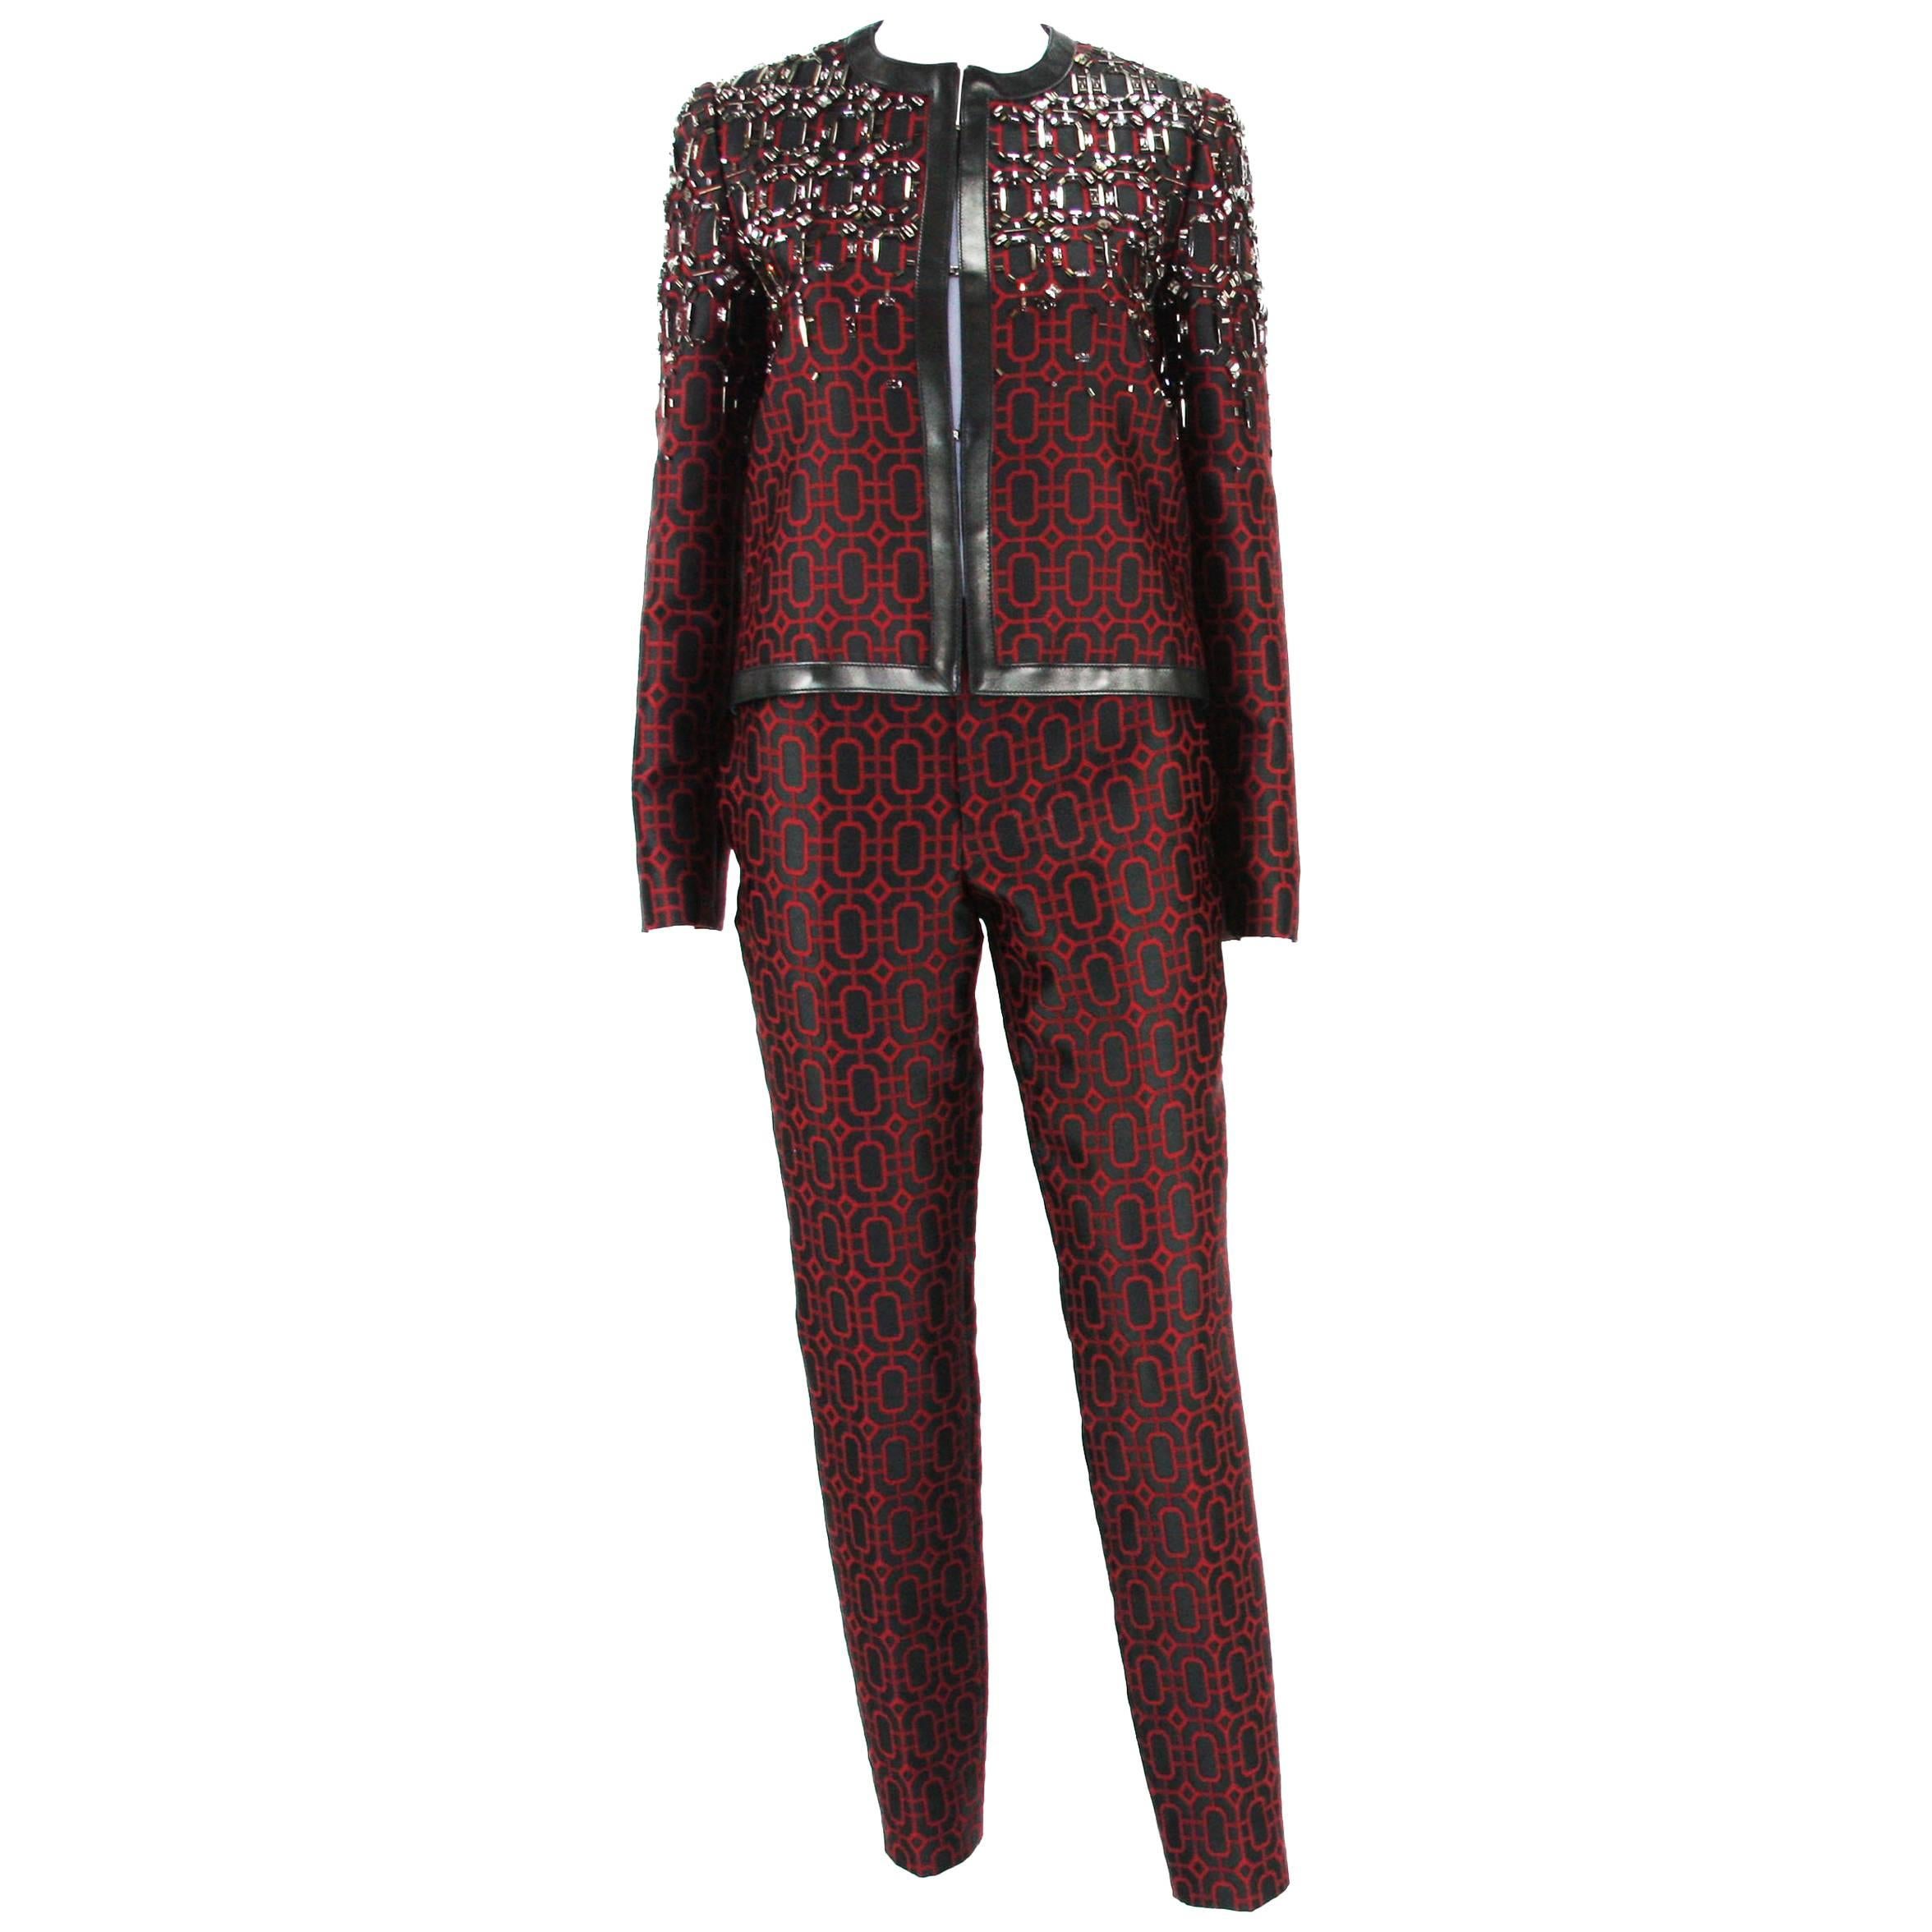 New Gucci Beaded Embellished Black Burgundy Pant Suit It. 40 - US 4/6